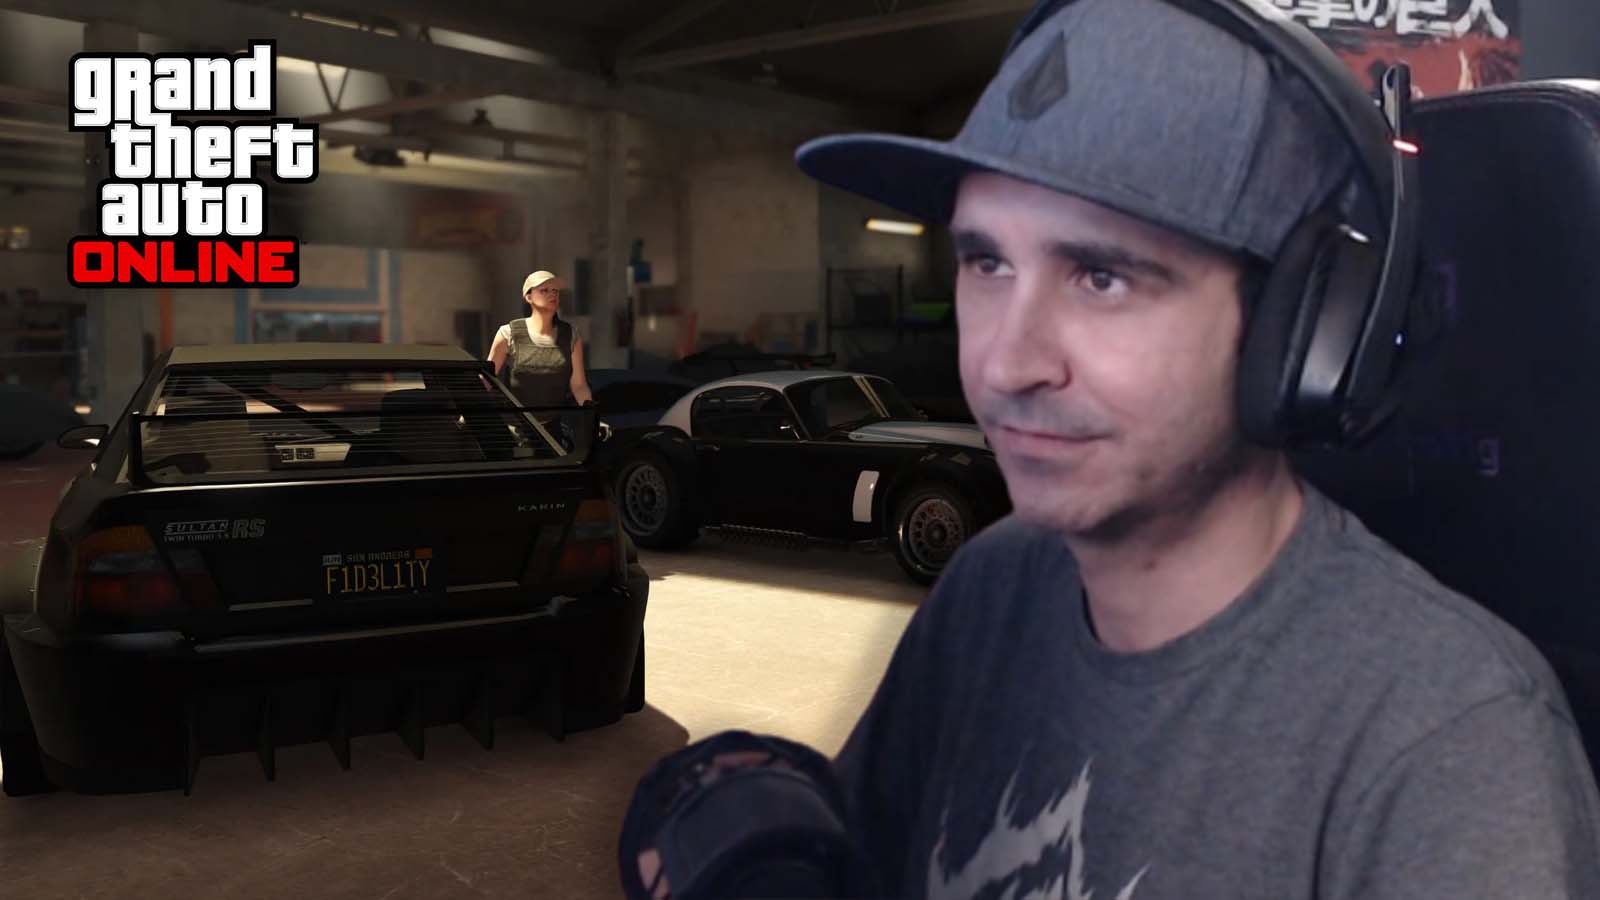 Summit1G slams NoPixel for 'trigger-happy' GTA RP bans: "There's more at stake nowadays"